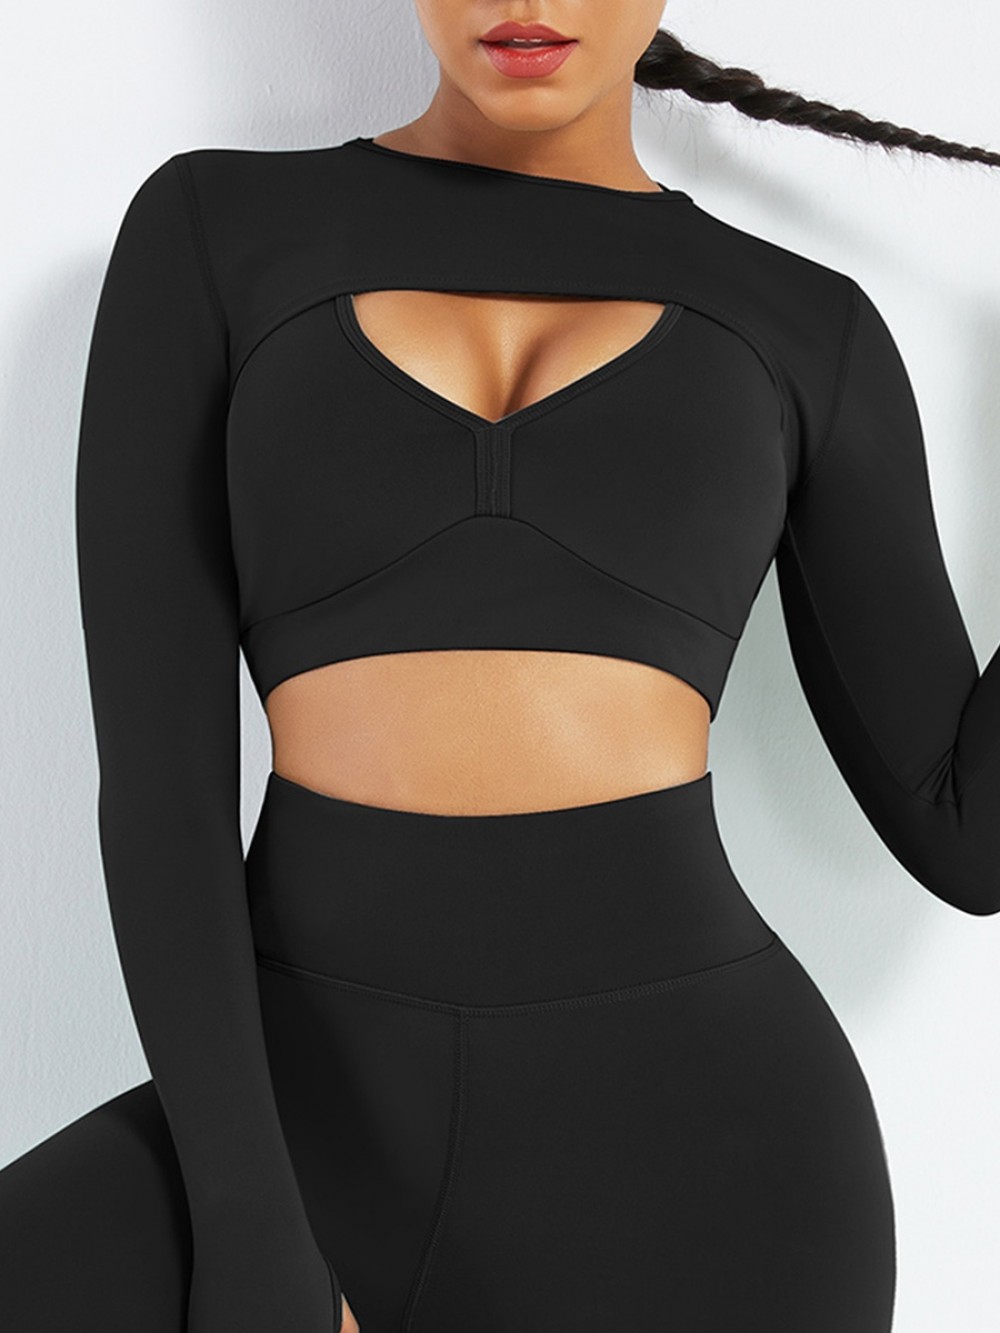 Black Round Collar Long Sleeve Crop Top Running Outfits